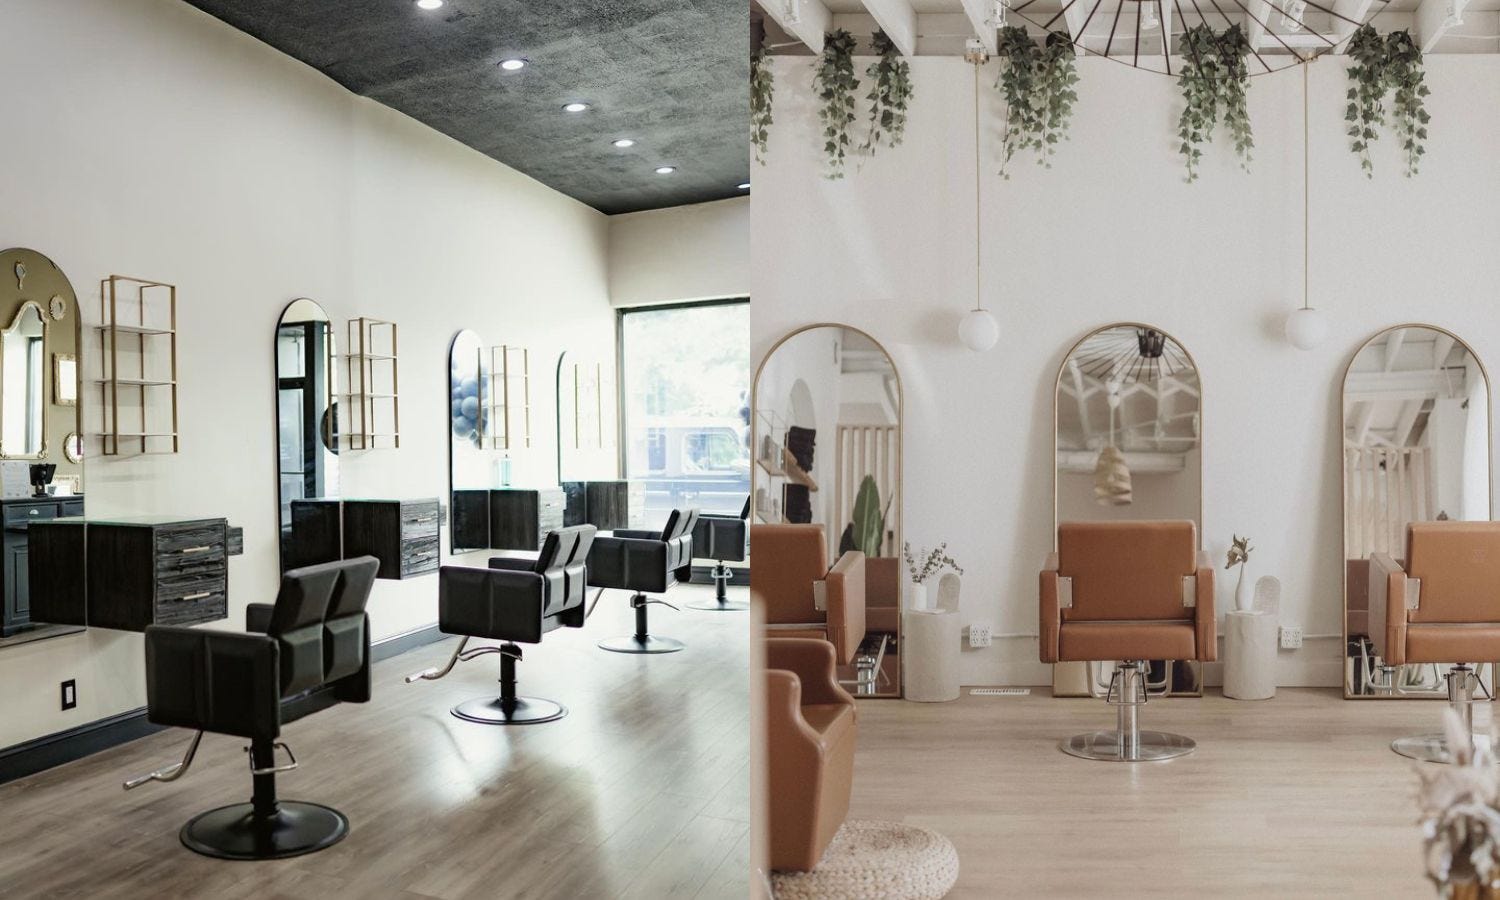 salon chairs positioned with enough distance between and around them